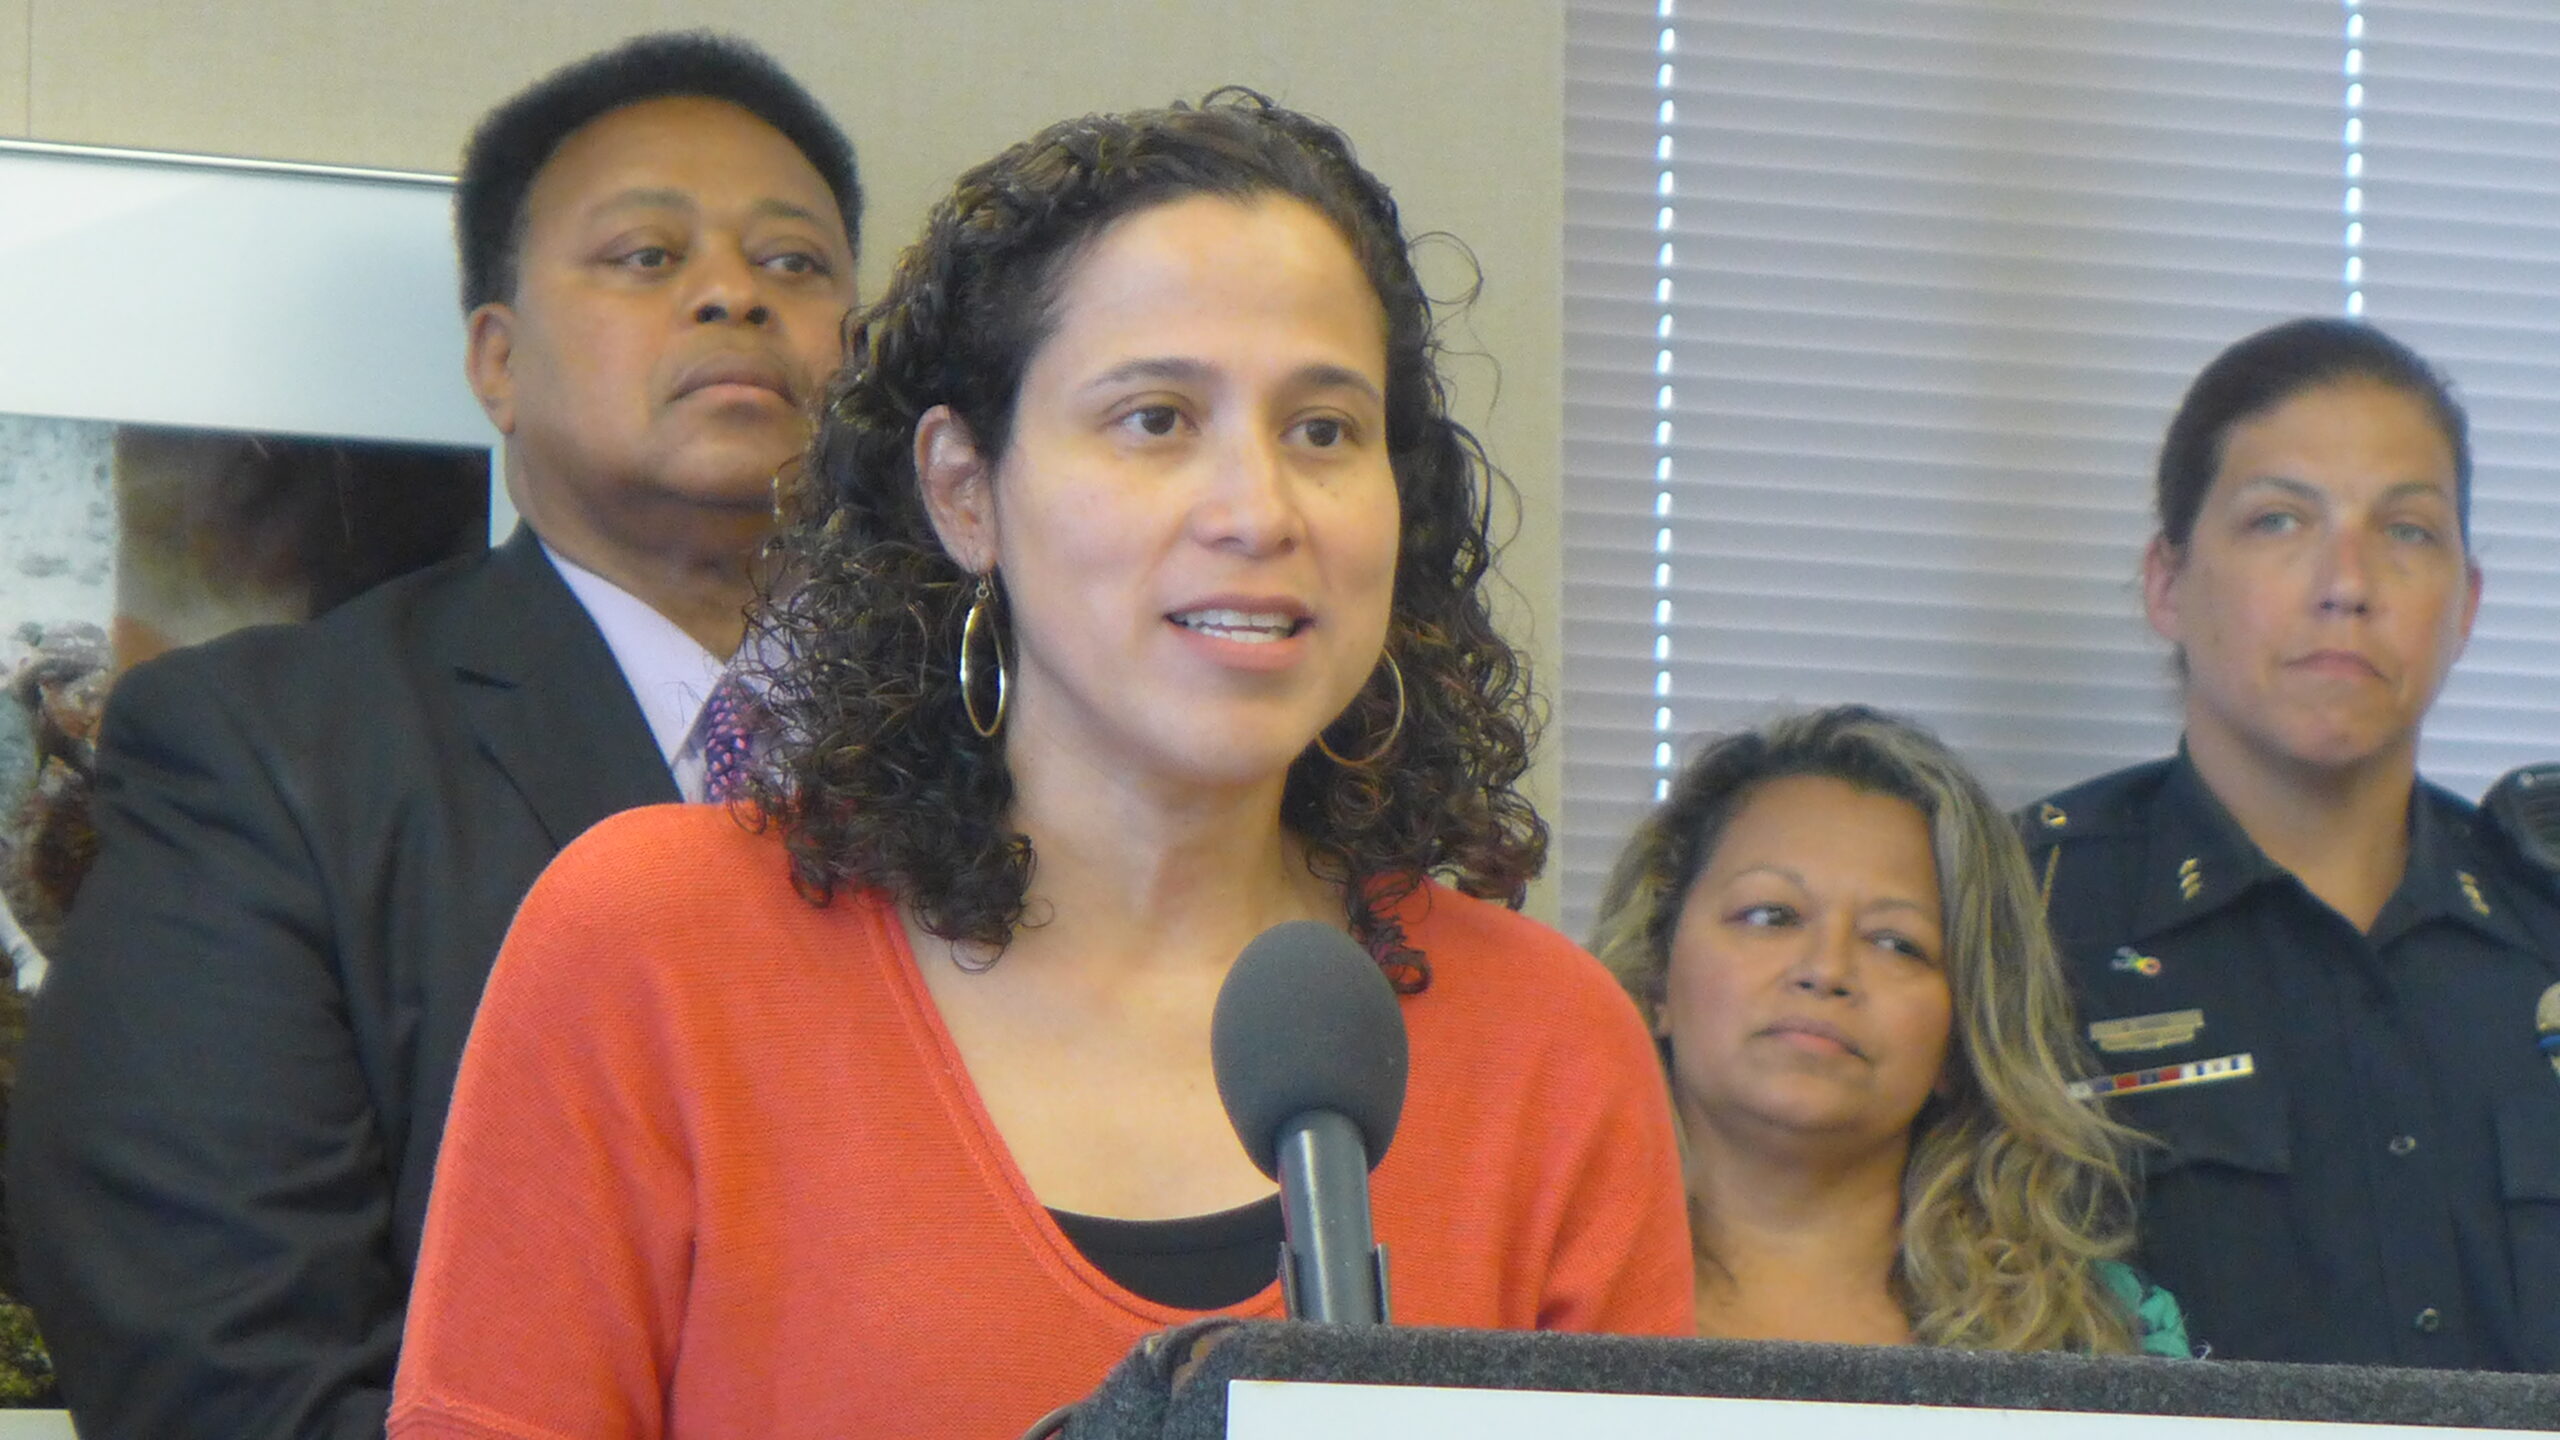 Immigration And Refugee Task Force Addresses Driving Without A License